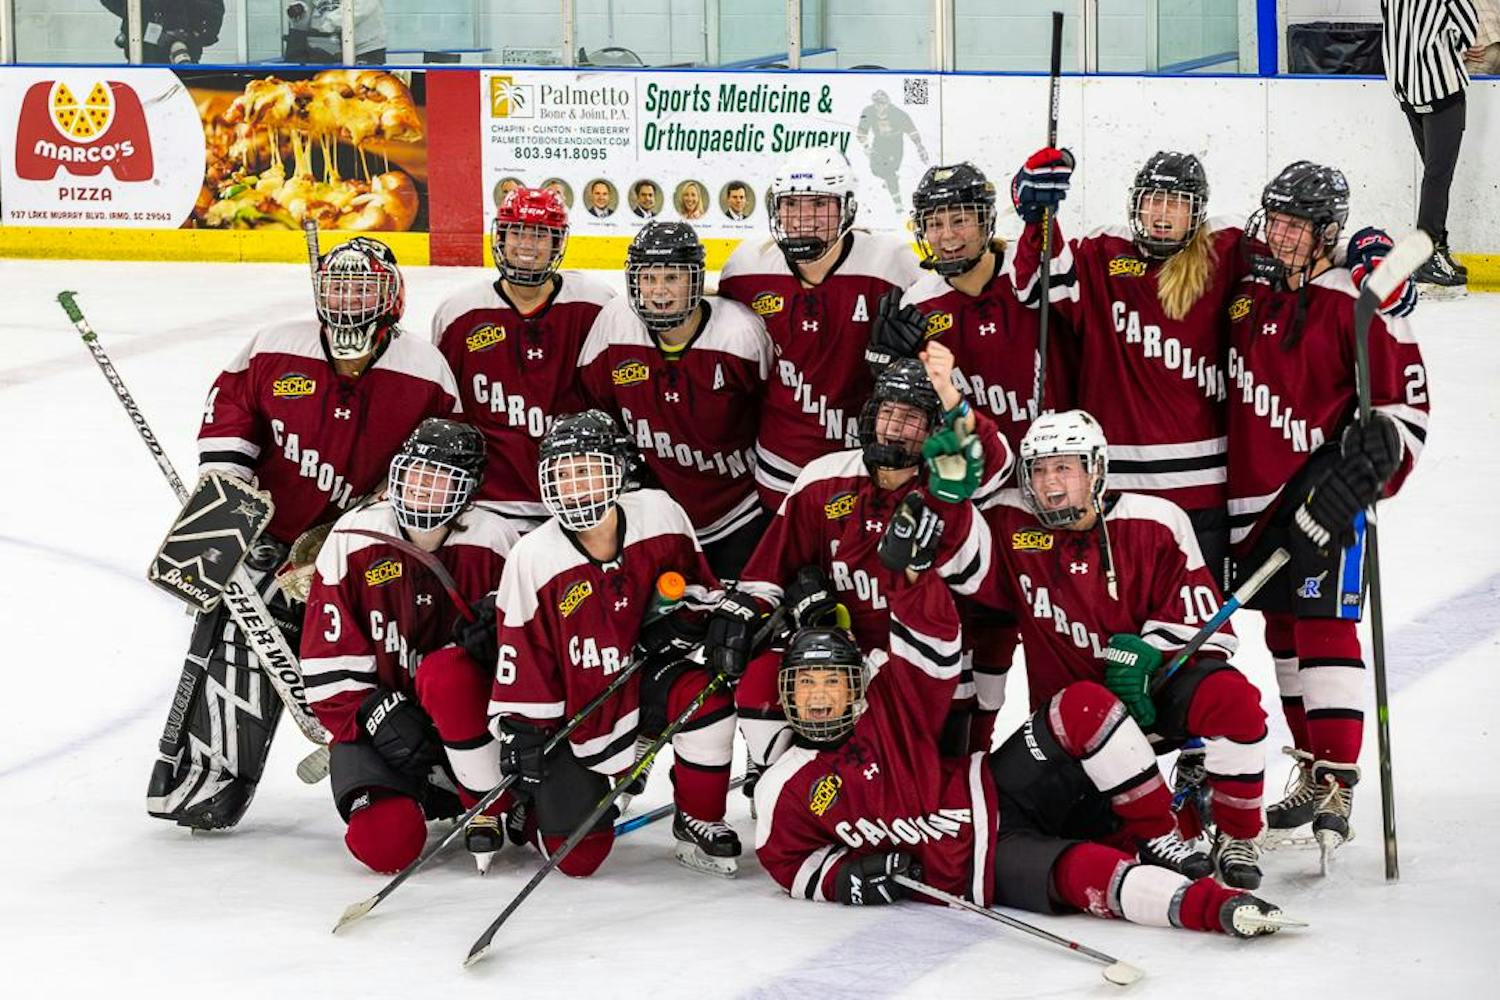 The Carolina women's club hockey team celebrates after its 2-1 victory against the South Carolina Lady Warriors on Oct. 1, 2023 in Irmo, S.C. This matchup marks the first recorded female hockey game in the 222-year history of 鶹С򽴫ý.